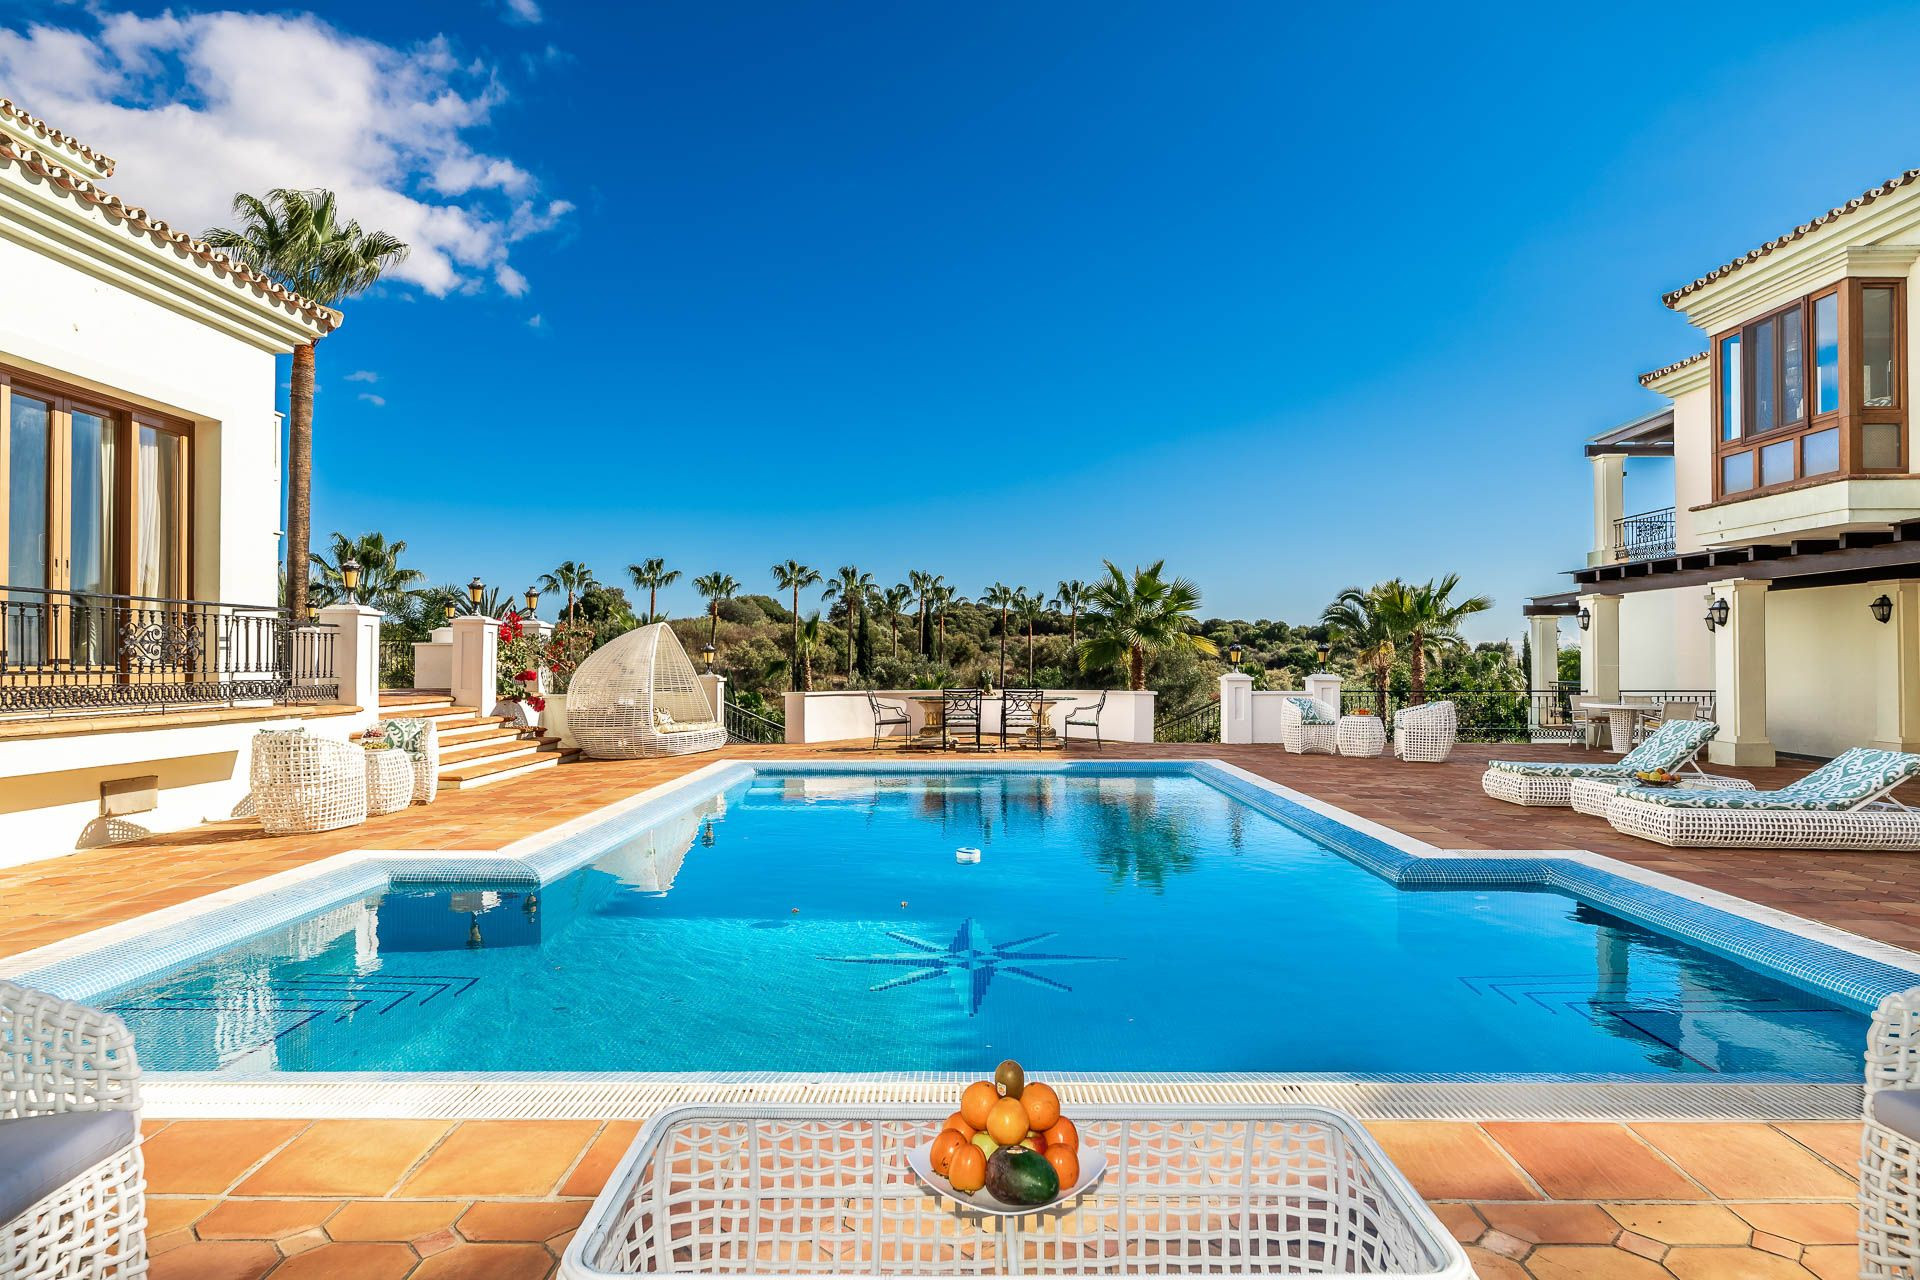 Luxury Mediterranean palace with 16 bedrooms located in the El Paraiso Alto area surrounded by the best golf courses in Costa del Sol